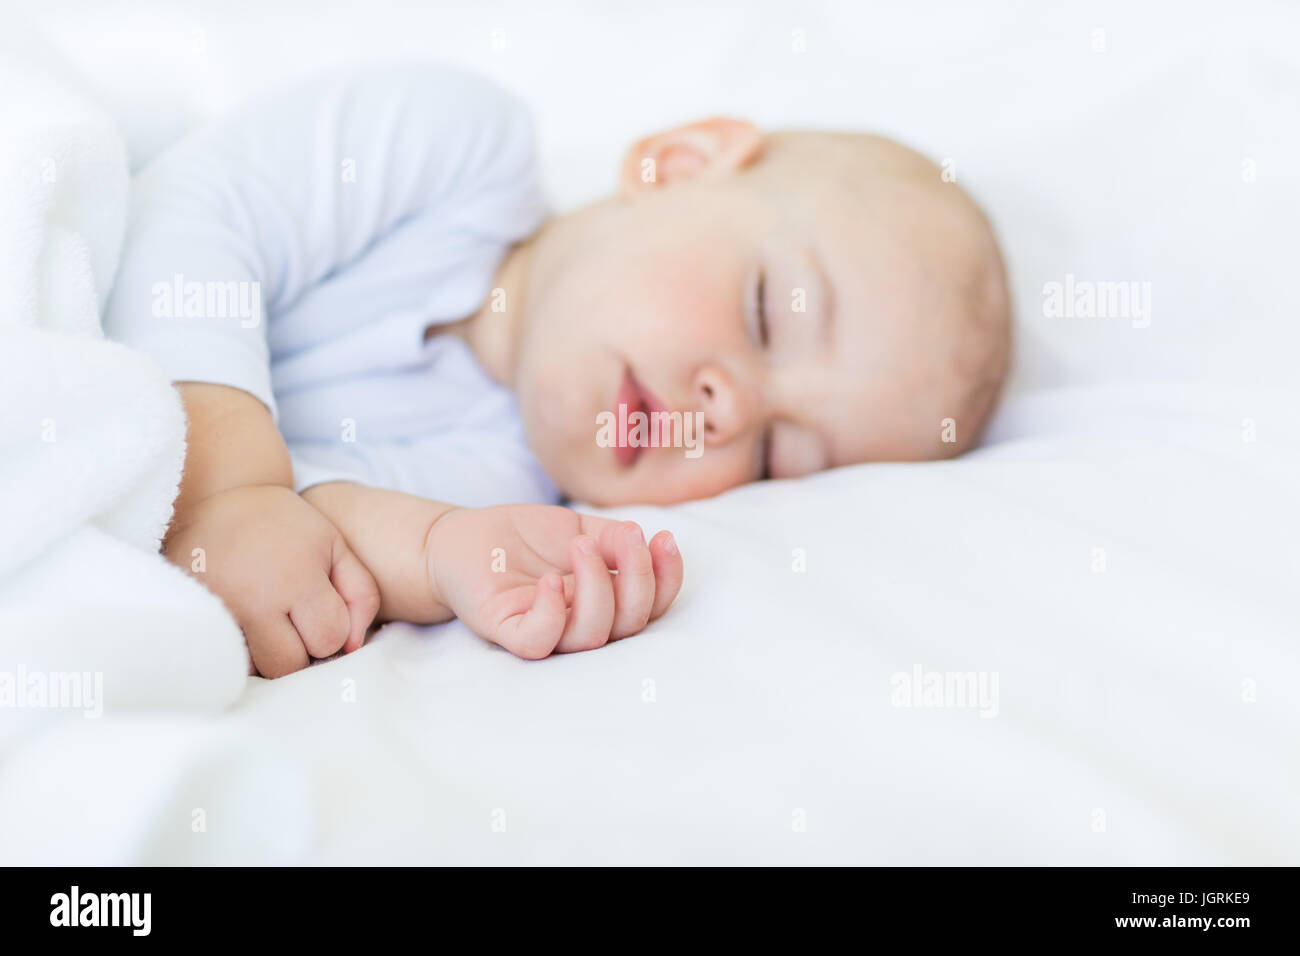 Close-up portrait of adorable baby boy sleeping in bed, 1 year old baby concept Stock Photo